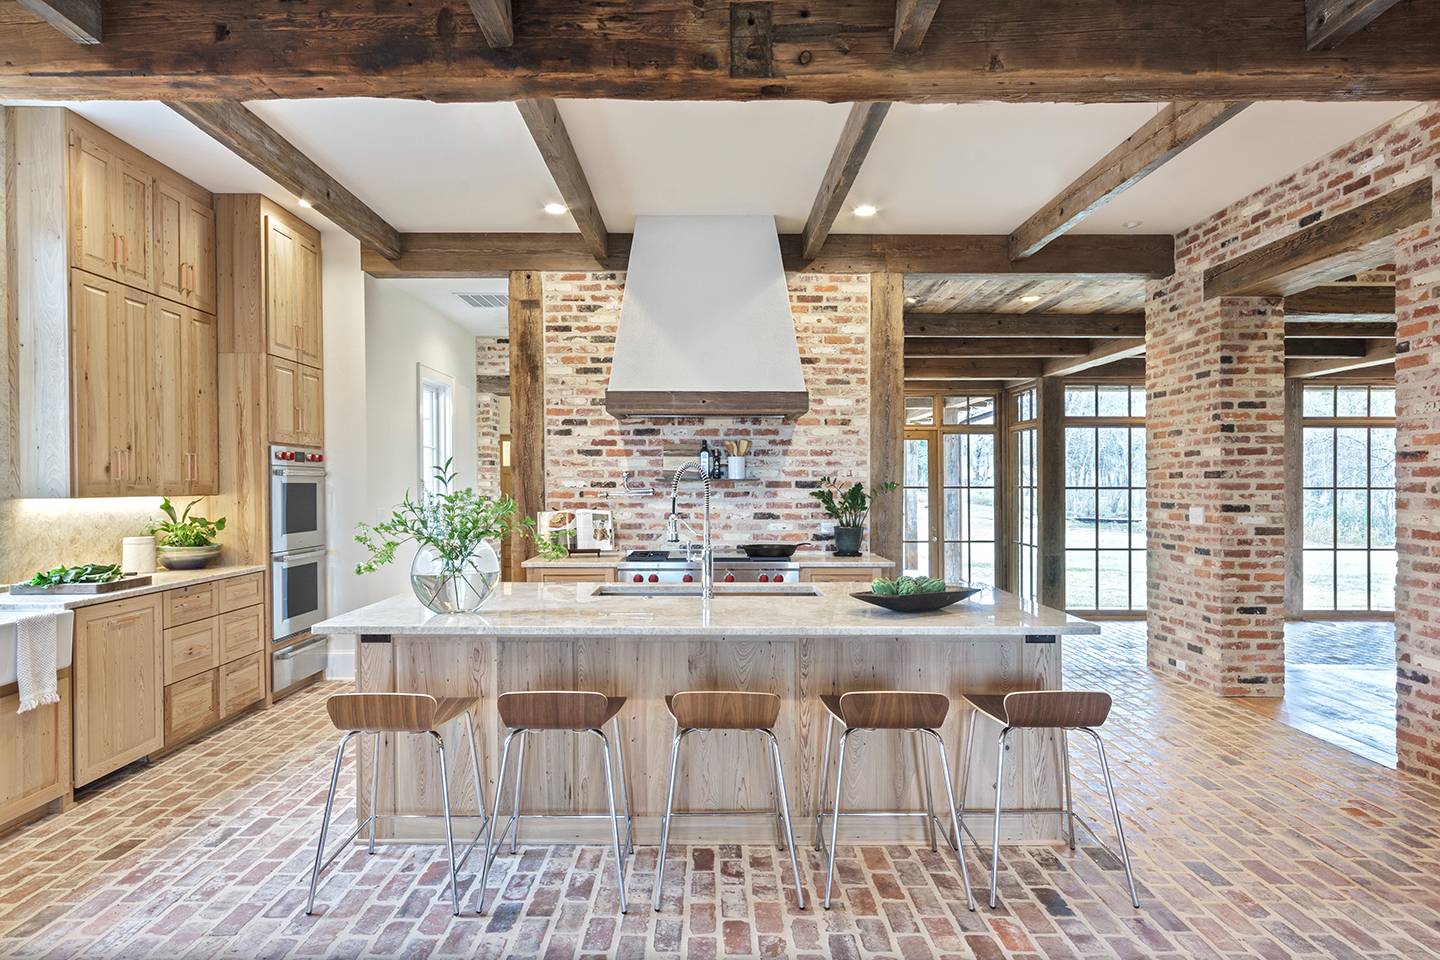 Interior view of the kitchen at Louisiana Rustic, a custom home designed and built by Farmer Payne Architects.